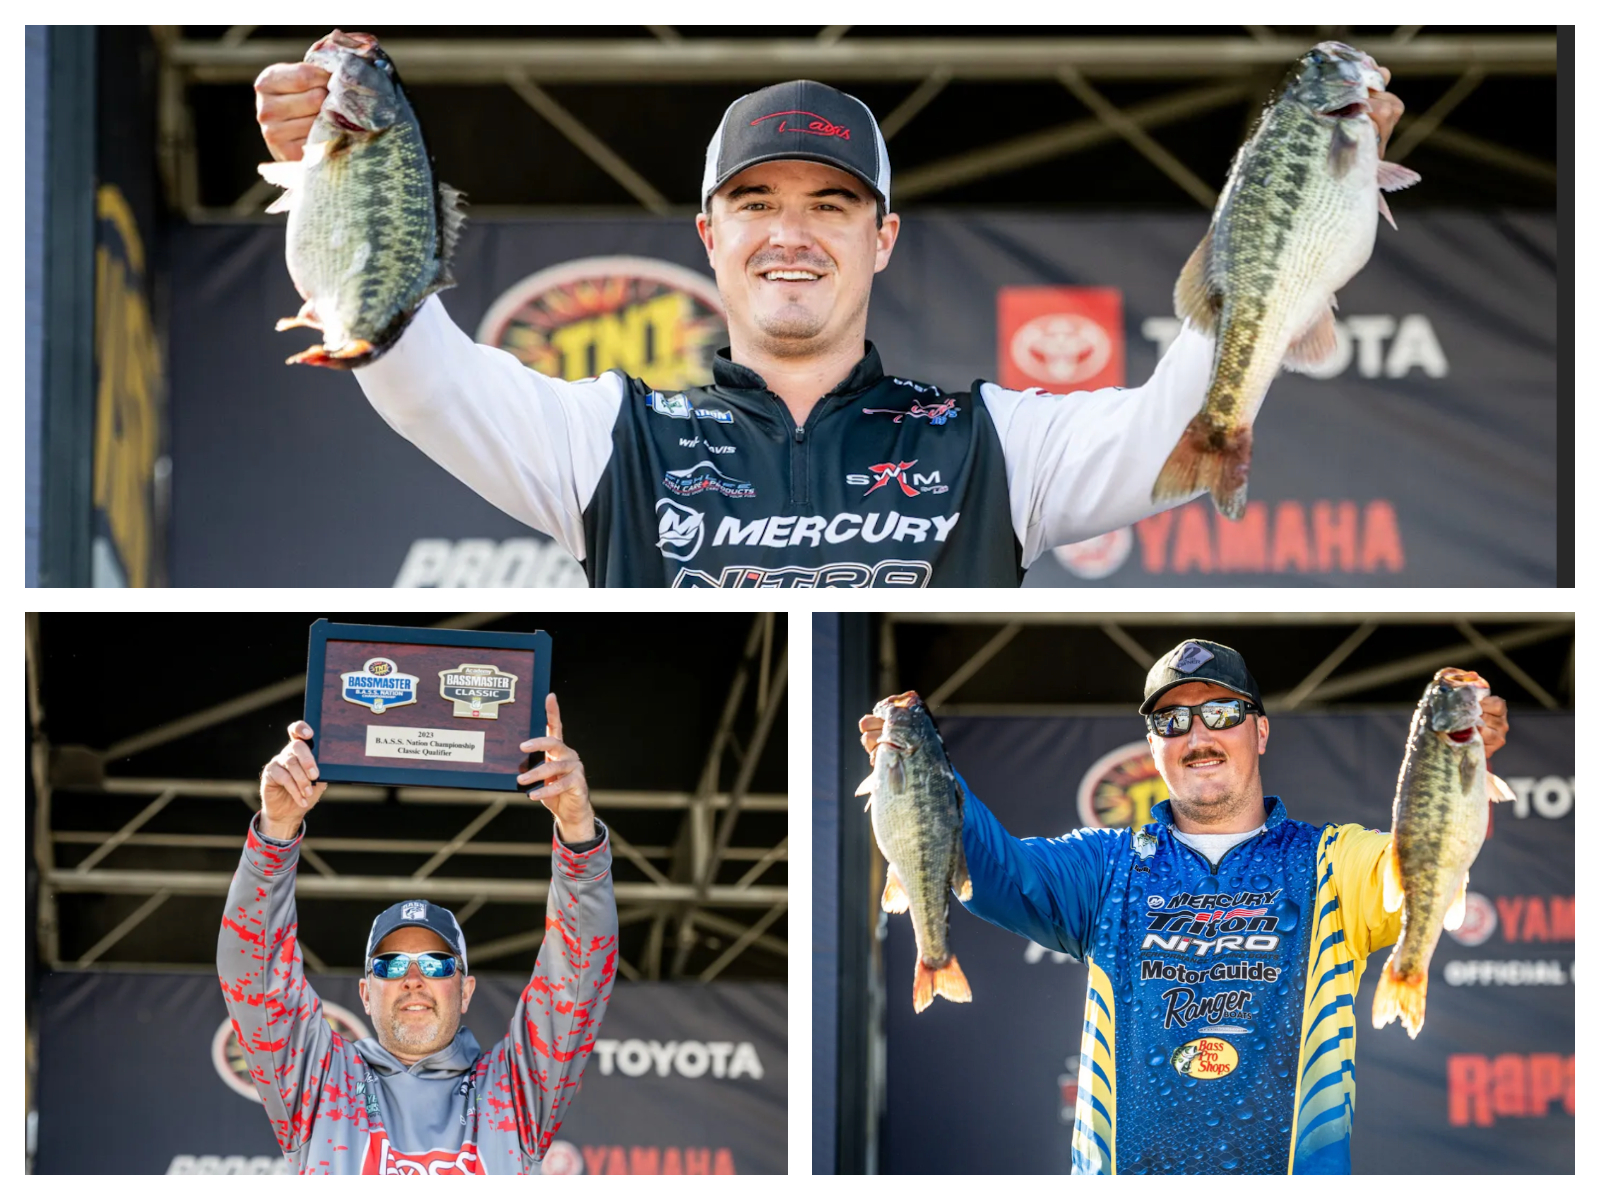 Meet the B.A.S.S. Nation's Classic qualifiers Bassmaster